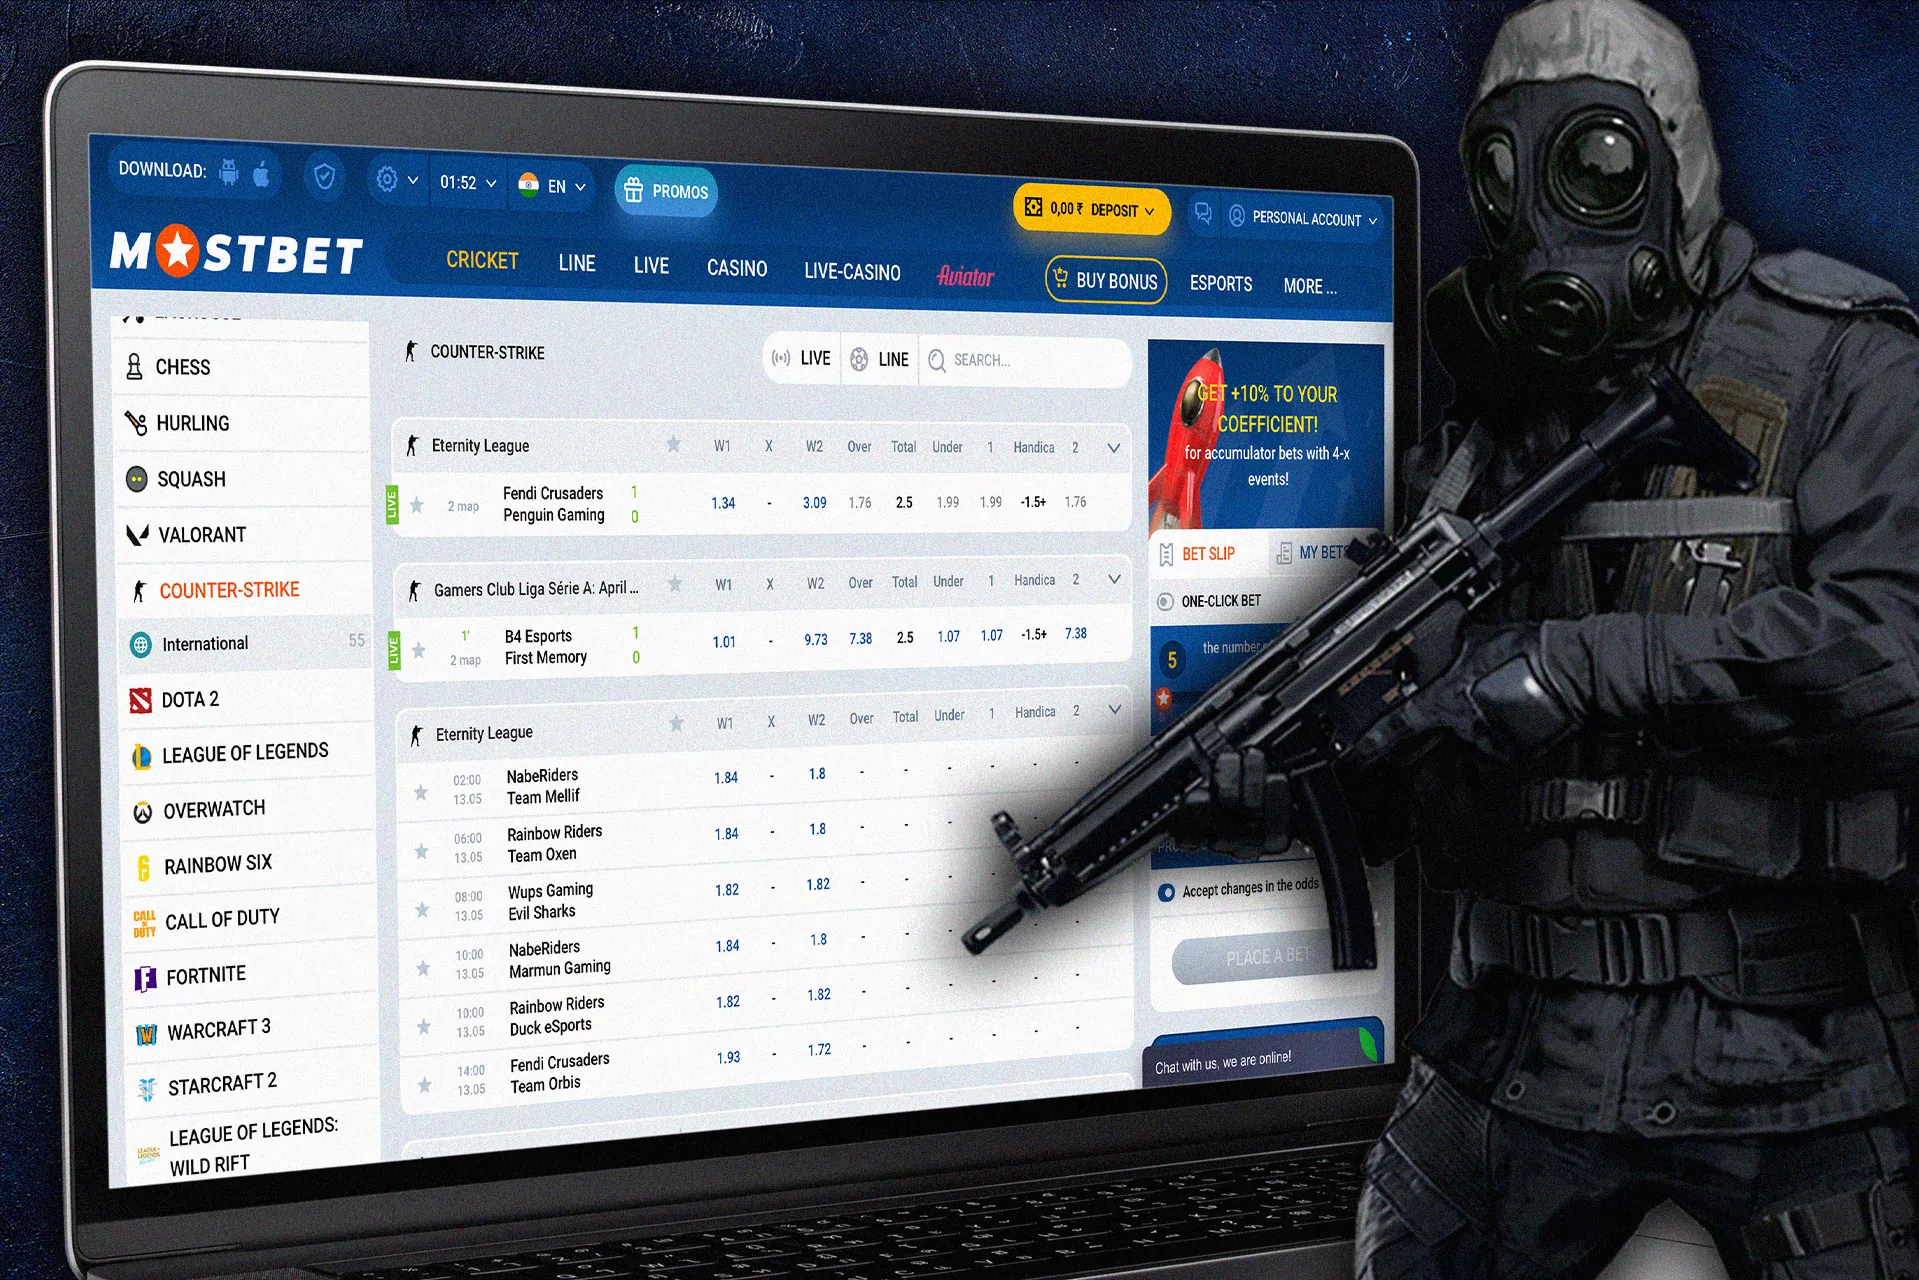 Place bets on CS:GO in the MOstbet sportsbook.